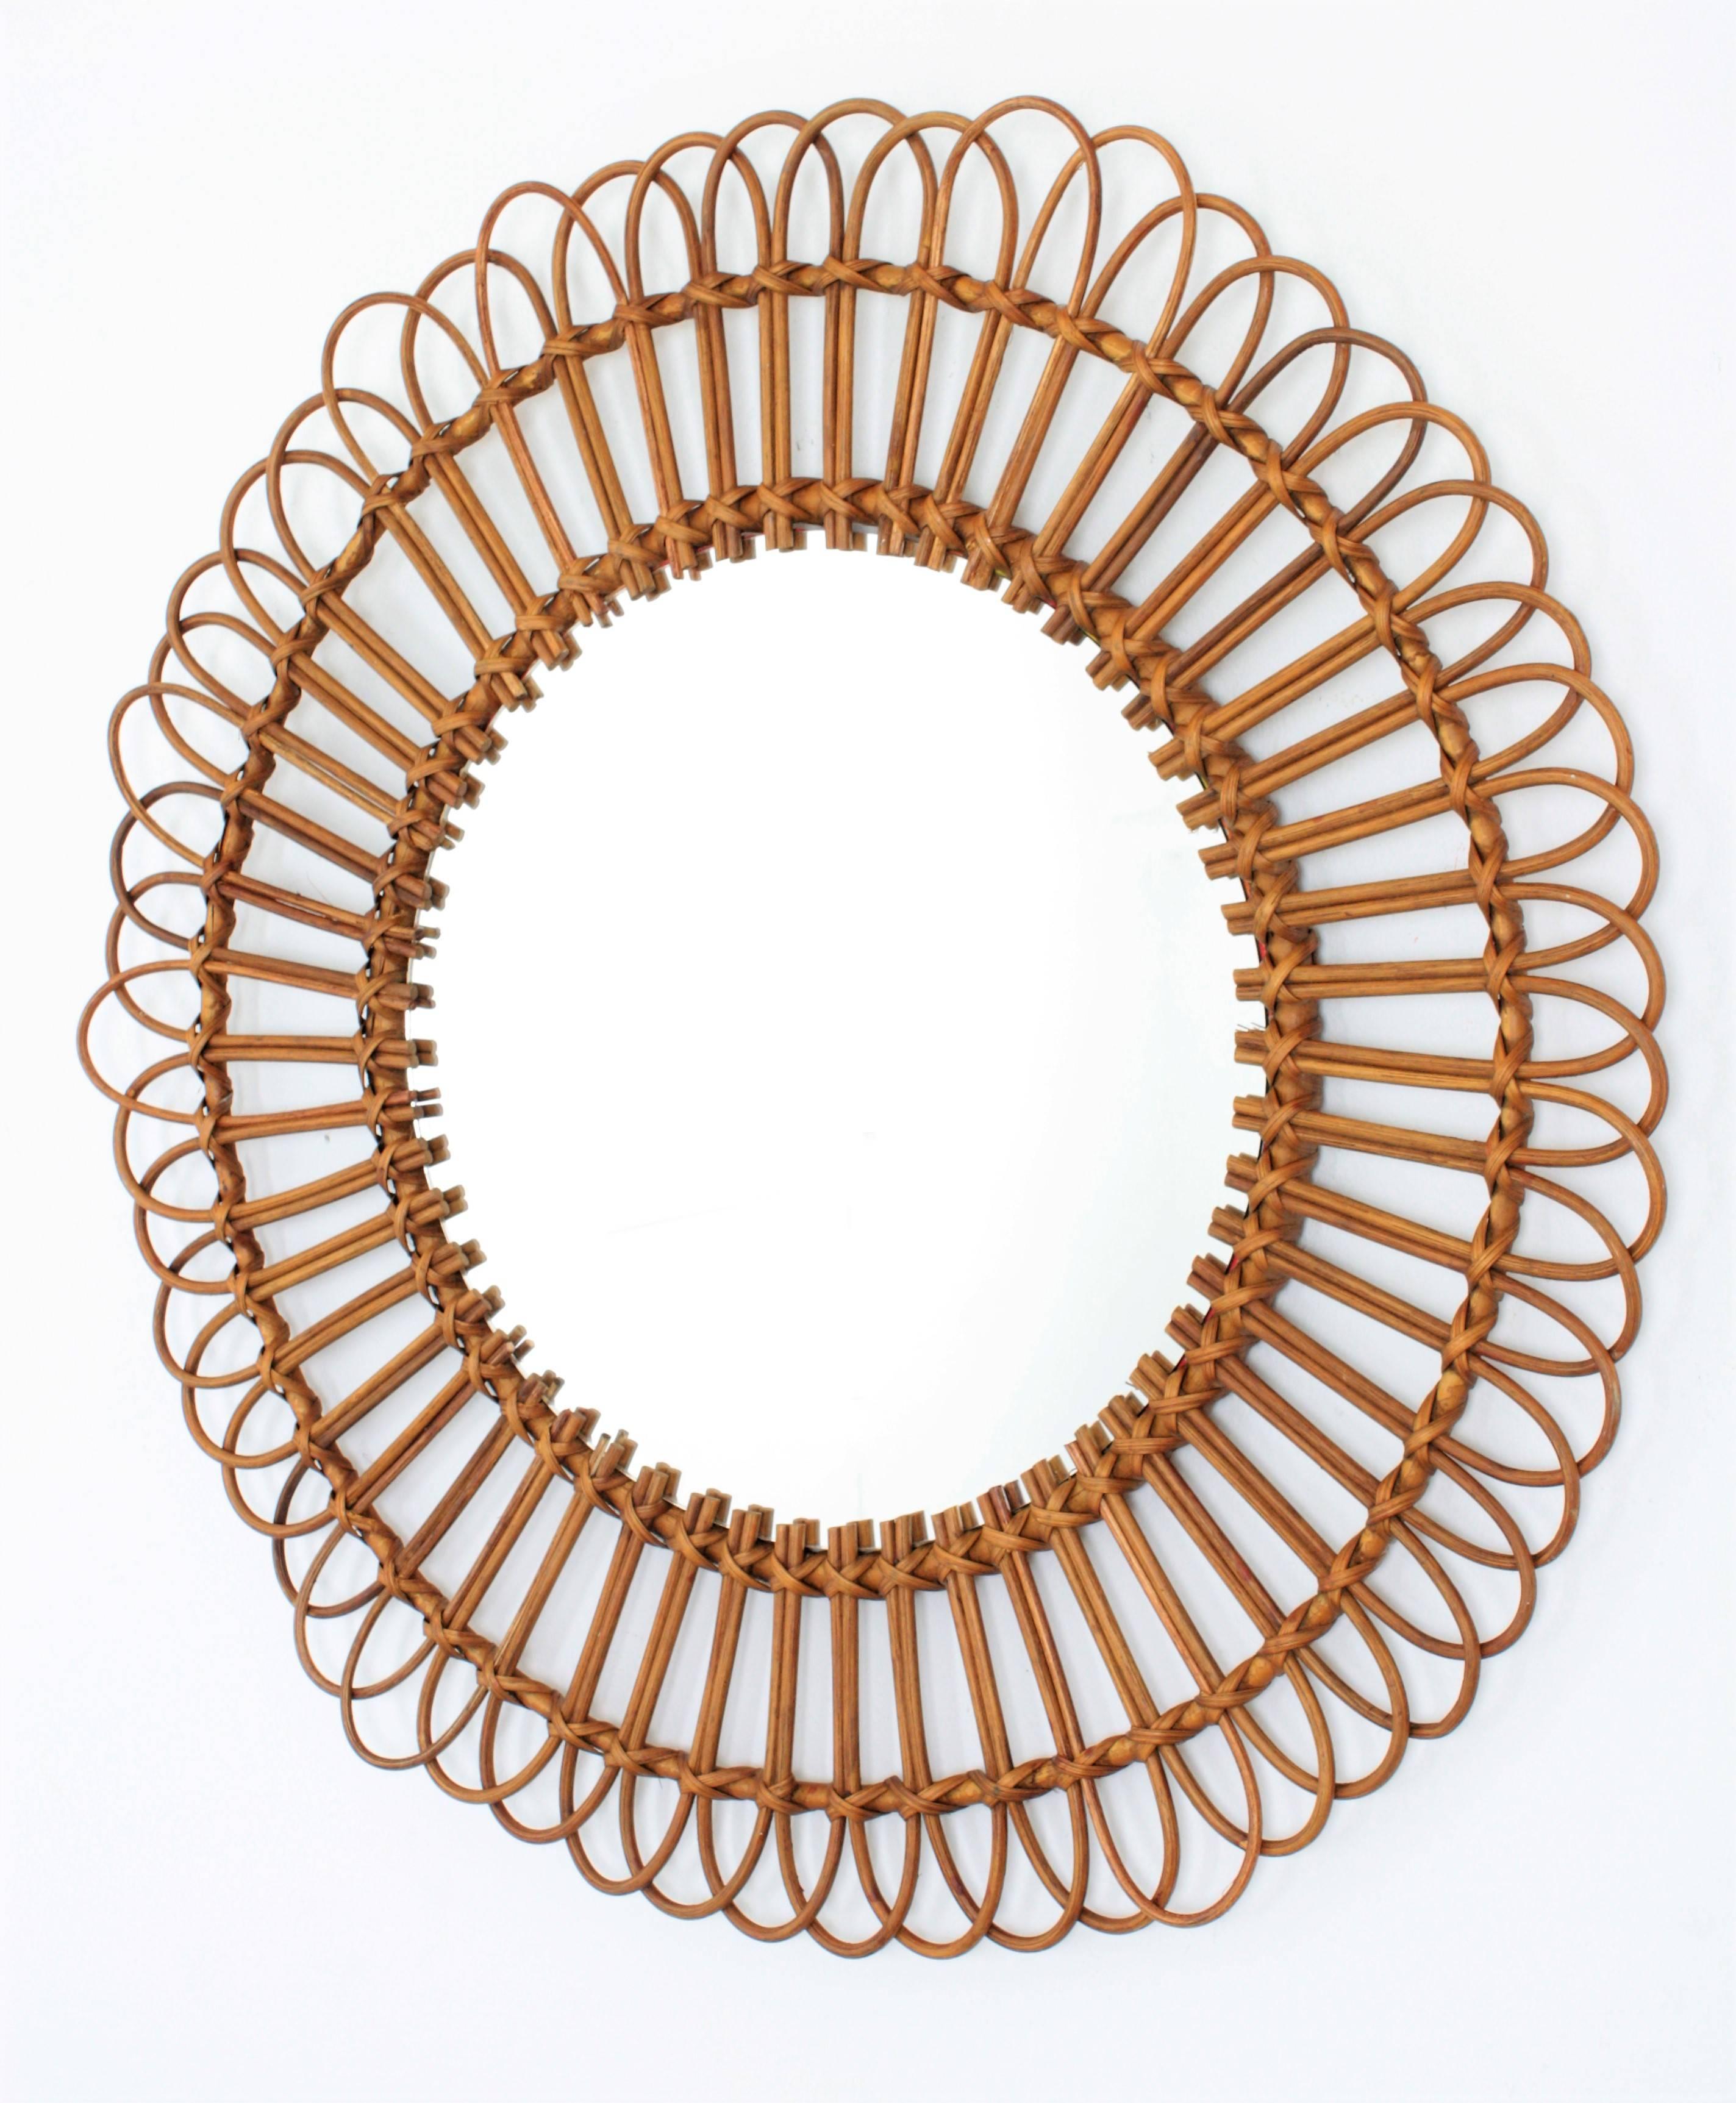 A flower burst or sunburst circular mirror handcrafted with natural rattan cane and wicker. 
A natural and fresh accent for a decoration, with all the taste of the Mediterranean Coast. This kind of mirrors were typical from the Spanish